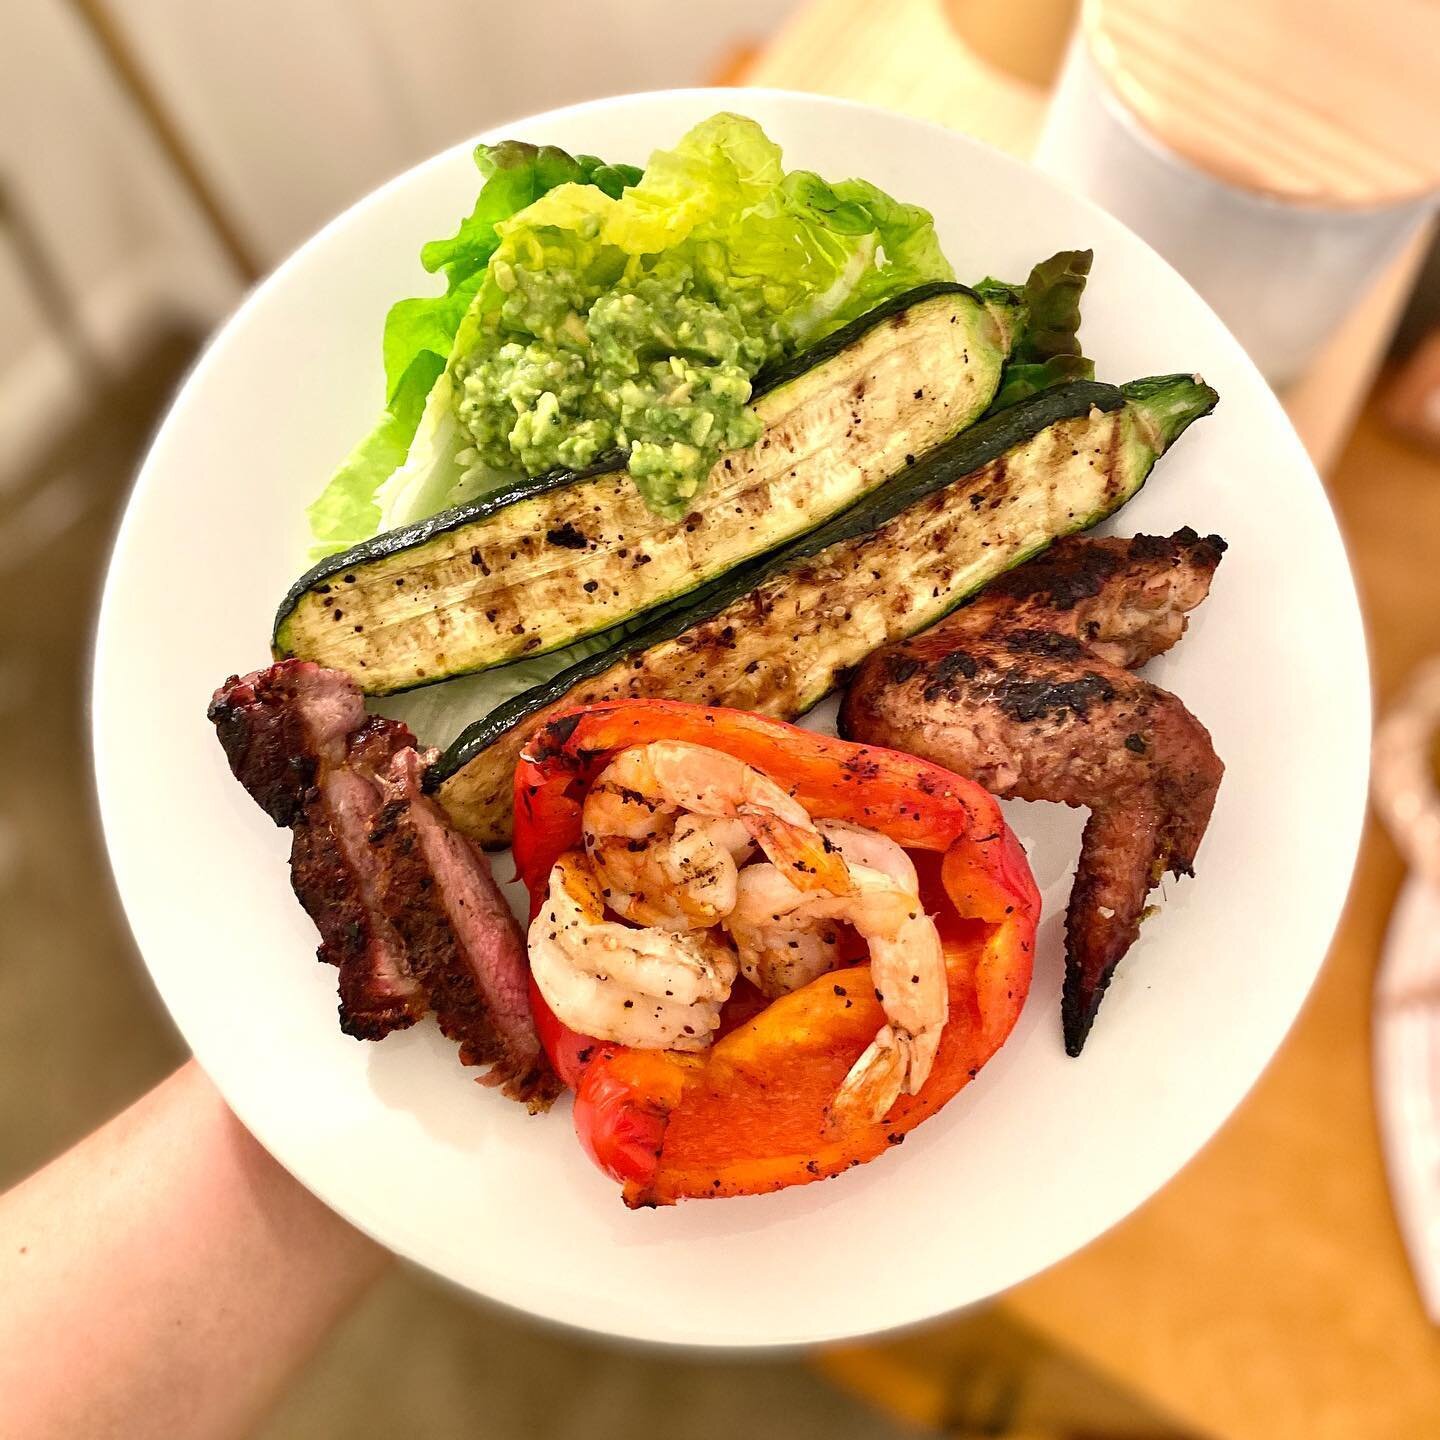 Memorial Day Grillin&rsquo;! Thank you to all the courageously devoted heroes of the past and present so that we can live in freedom here in the US of A🇺🇸💛✨. Summer yummies include grass-fed steak @heb , wild shrimp, green curry chicken wing (insp